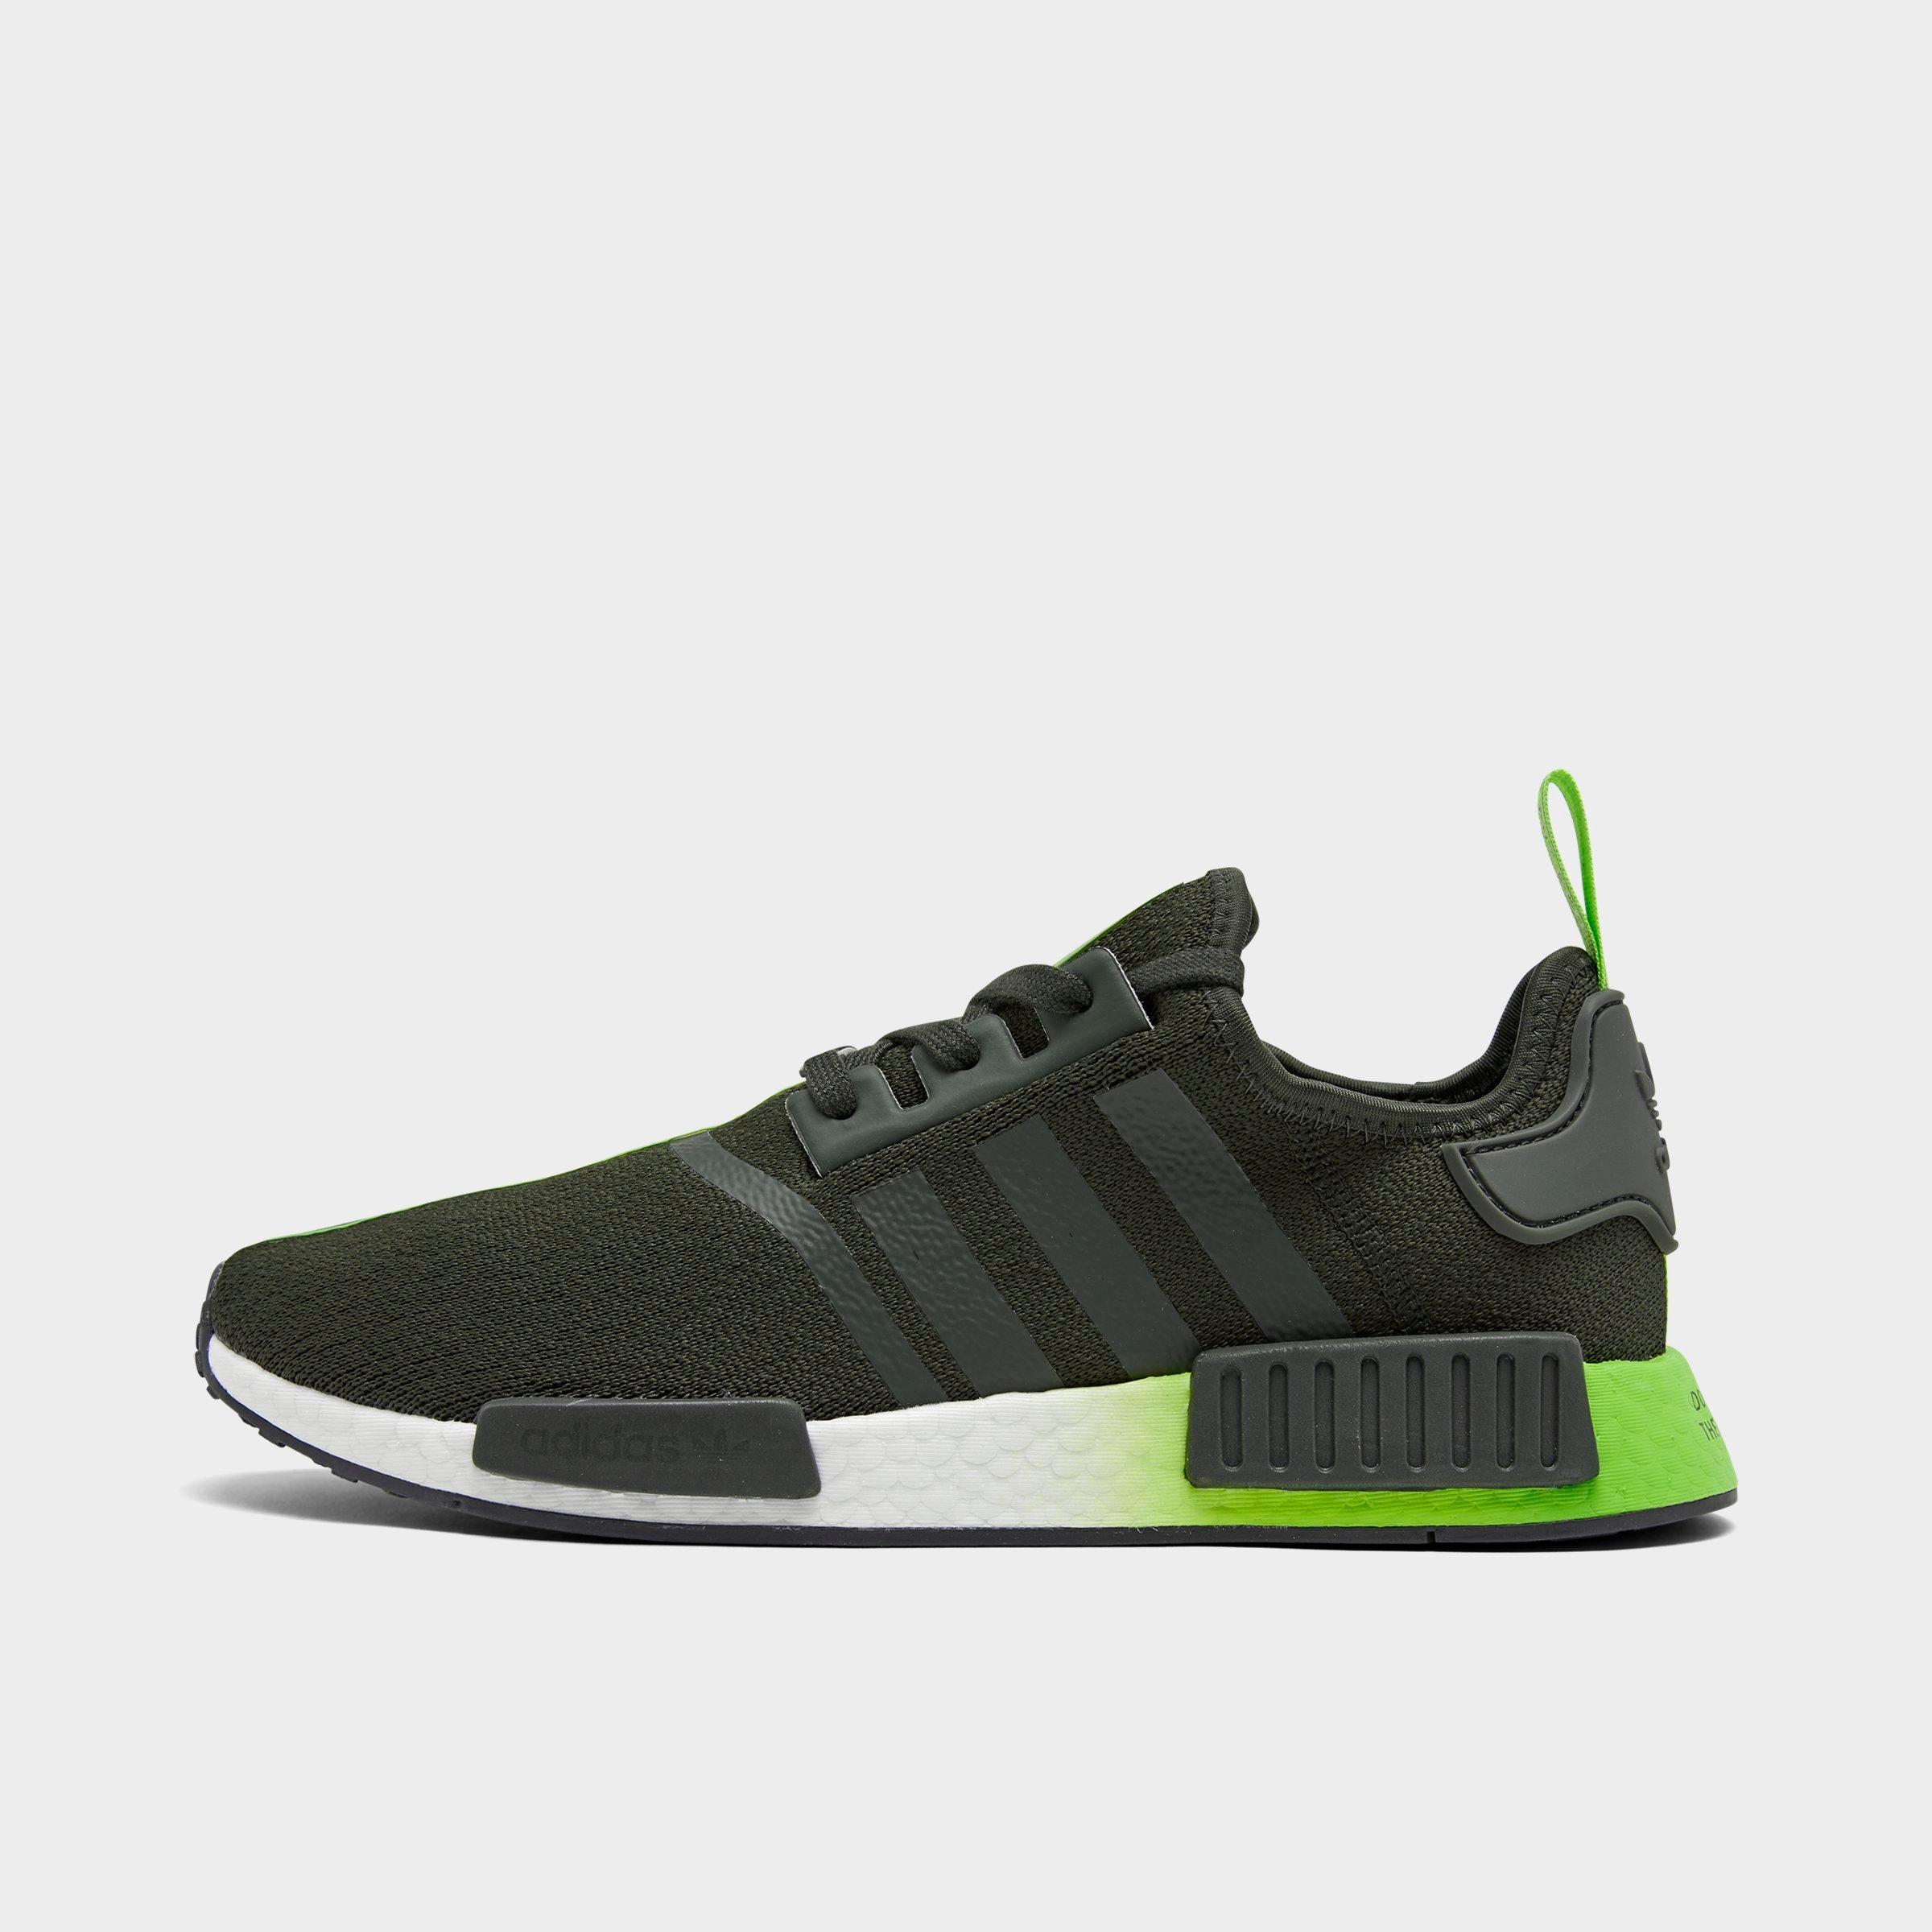 Nmd R1 W DO NOT USE footwear white tactile green